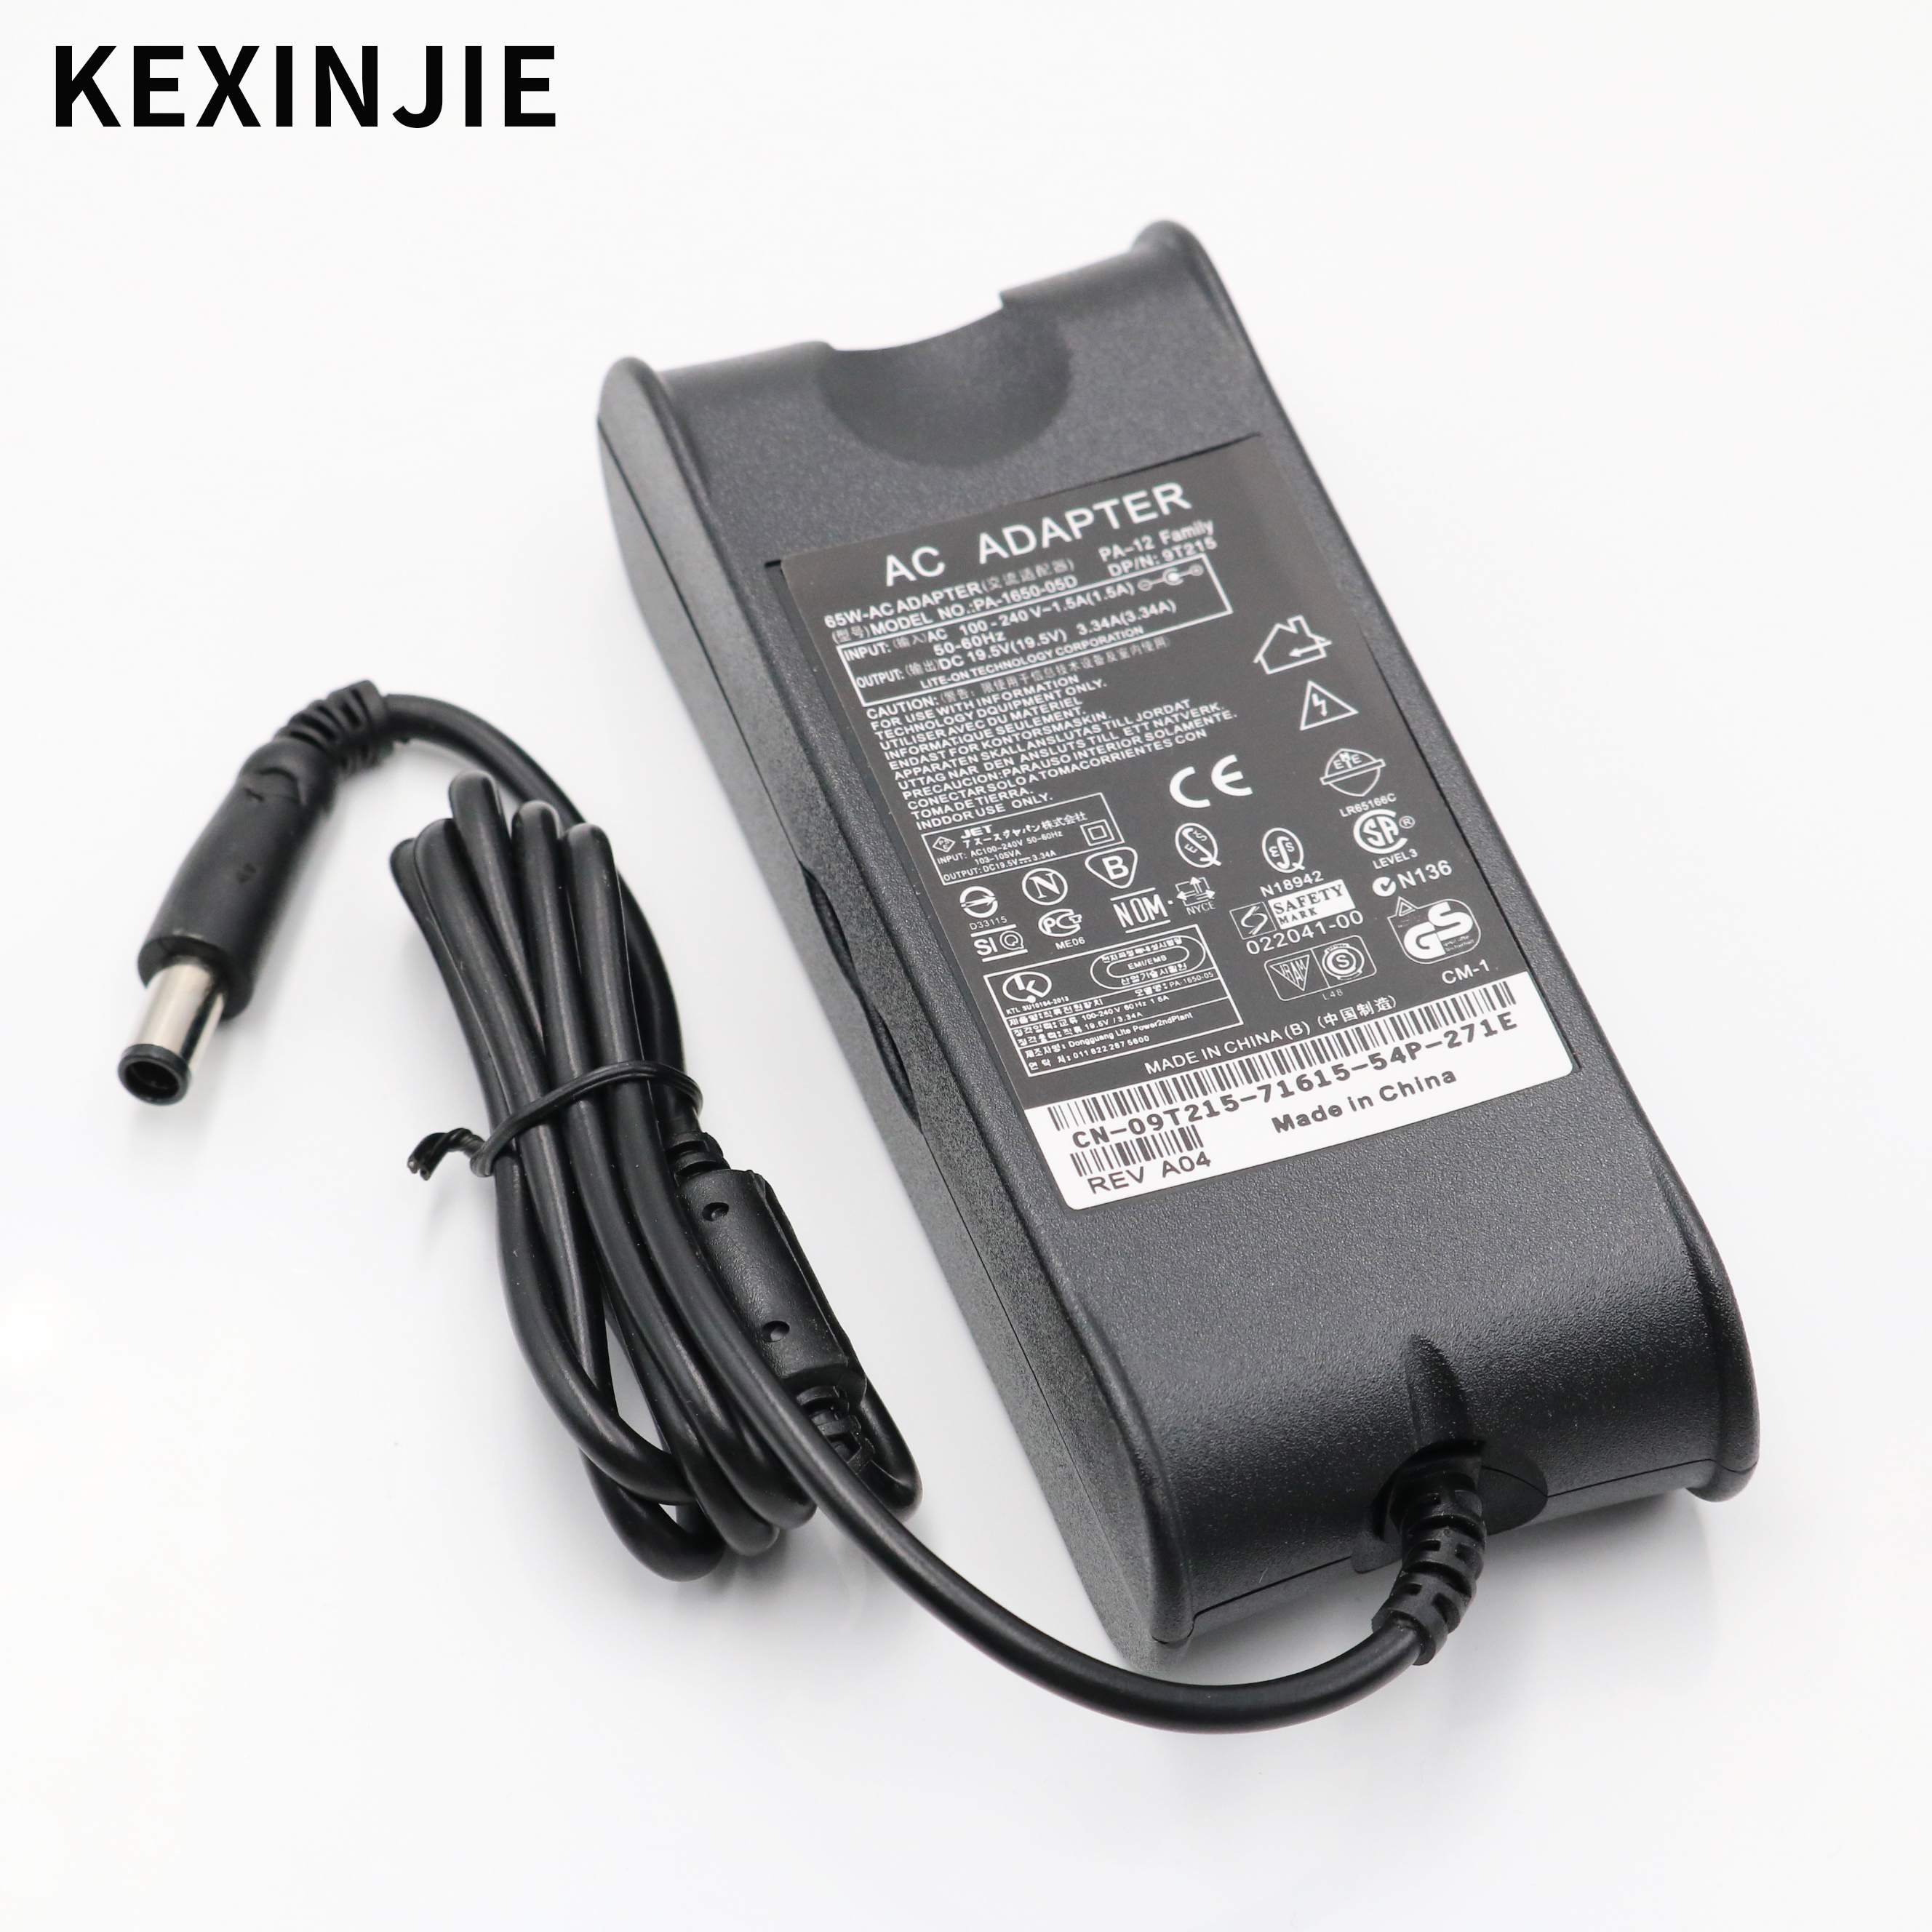 Laptop Power Supply Charger Plug AC Adapter For DELL Vostro 3360 3460 3560 2420 2421 2520 2521 19.5V 3.34A 65W AC Adapter